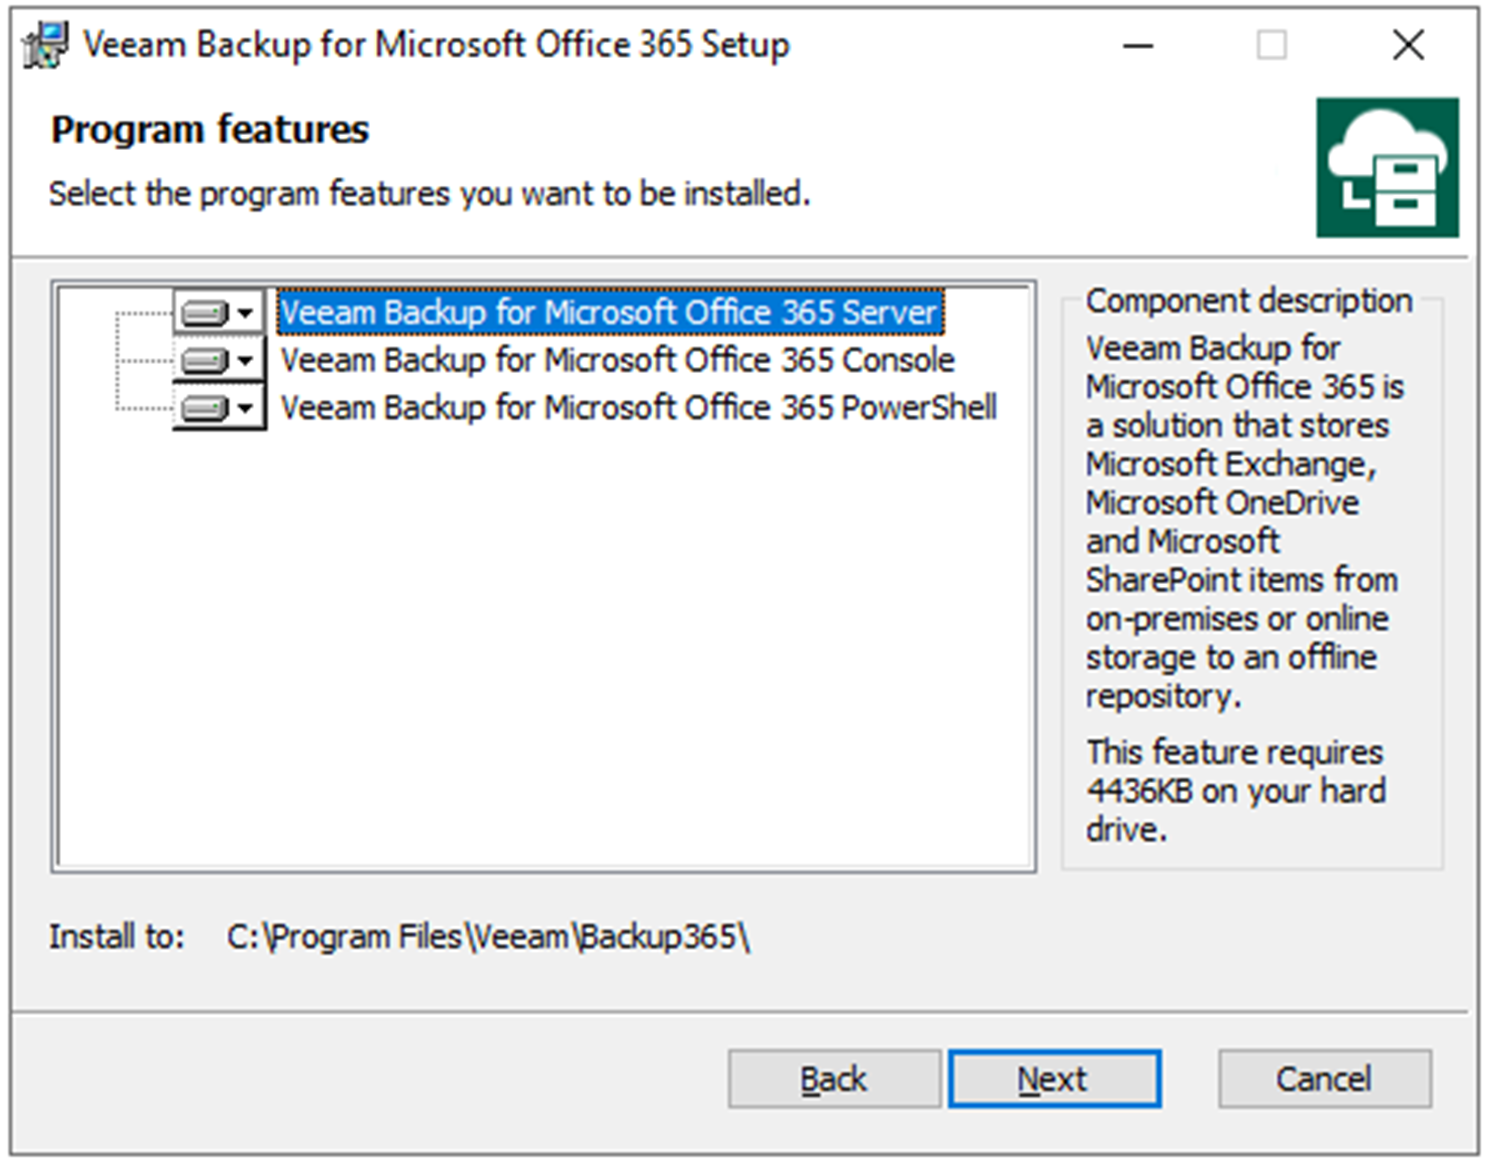 100320 2346 HowtoUpgrad11 - How to Upgrade Veeam Backup for Microsoft Office 365 to V4c Day 0 Update